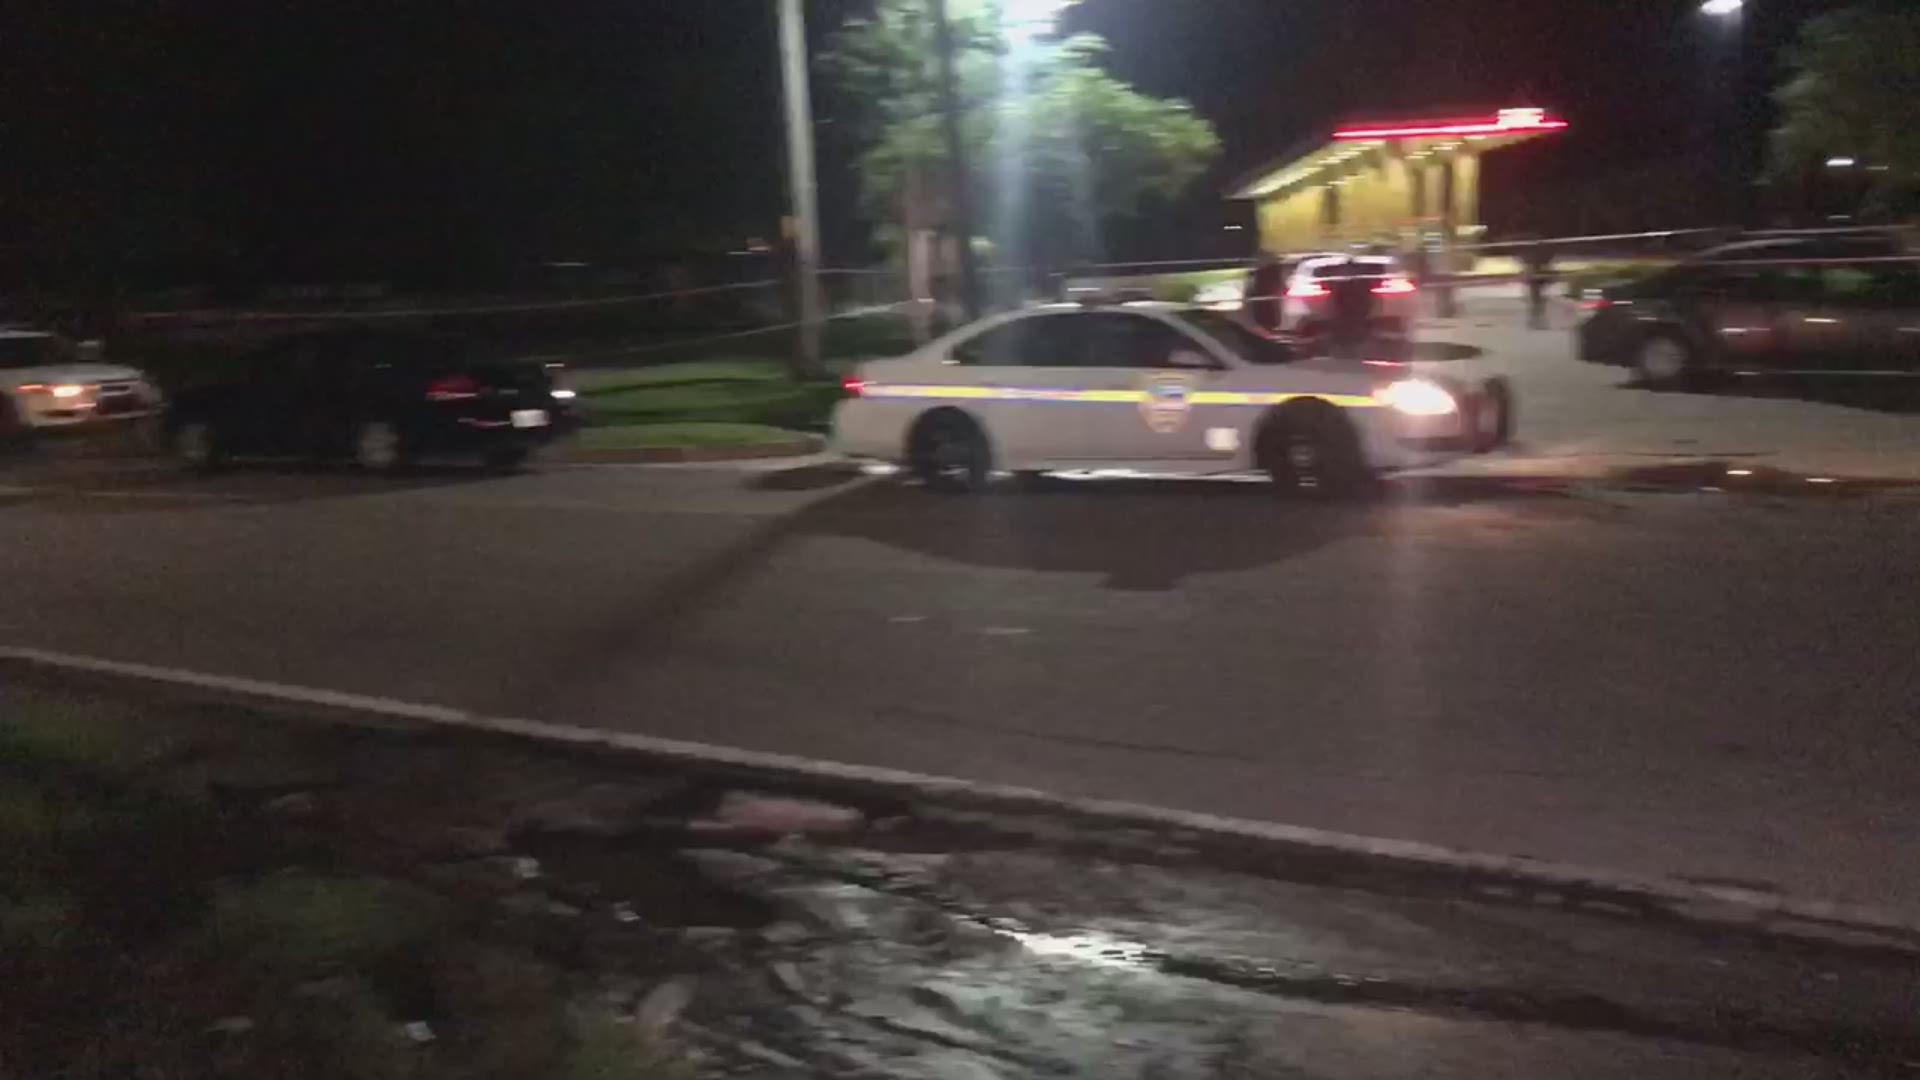 A woman was shot at the Racetrack gas station in NW Jacksonville.